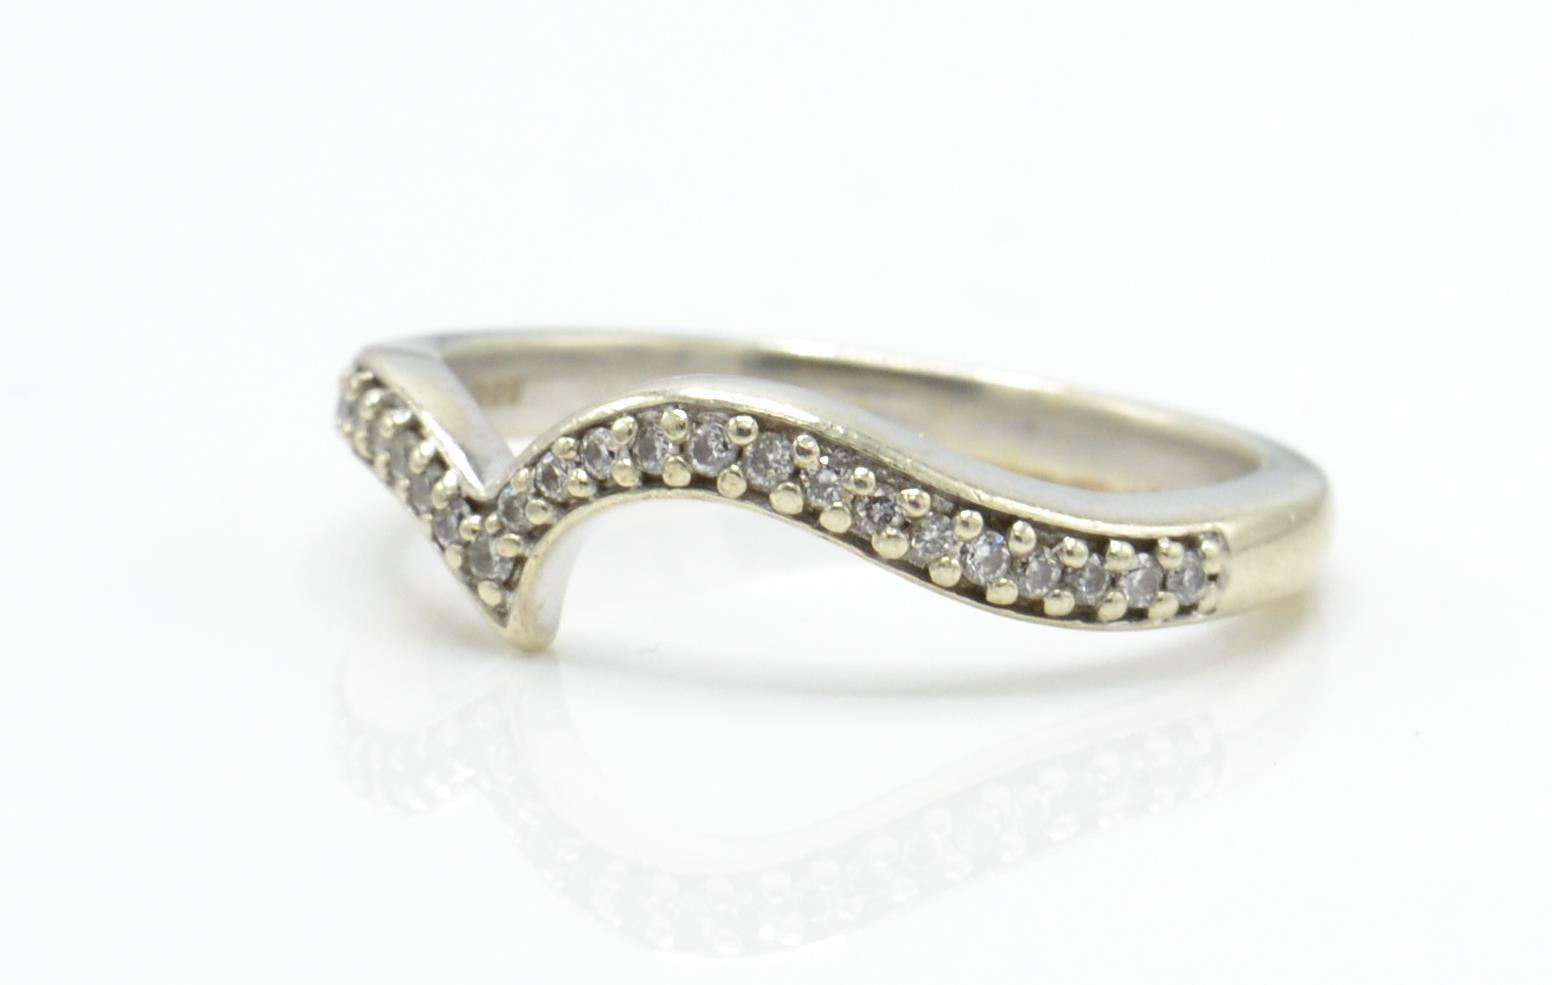 A hallmarked 9ct white gold and diamond wishbone ring. - Image 2 of 4